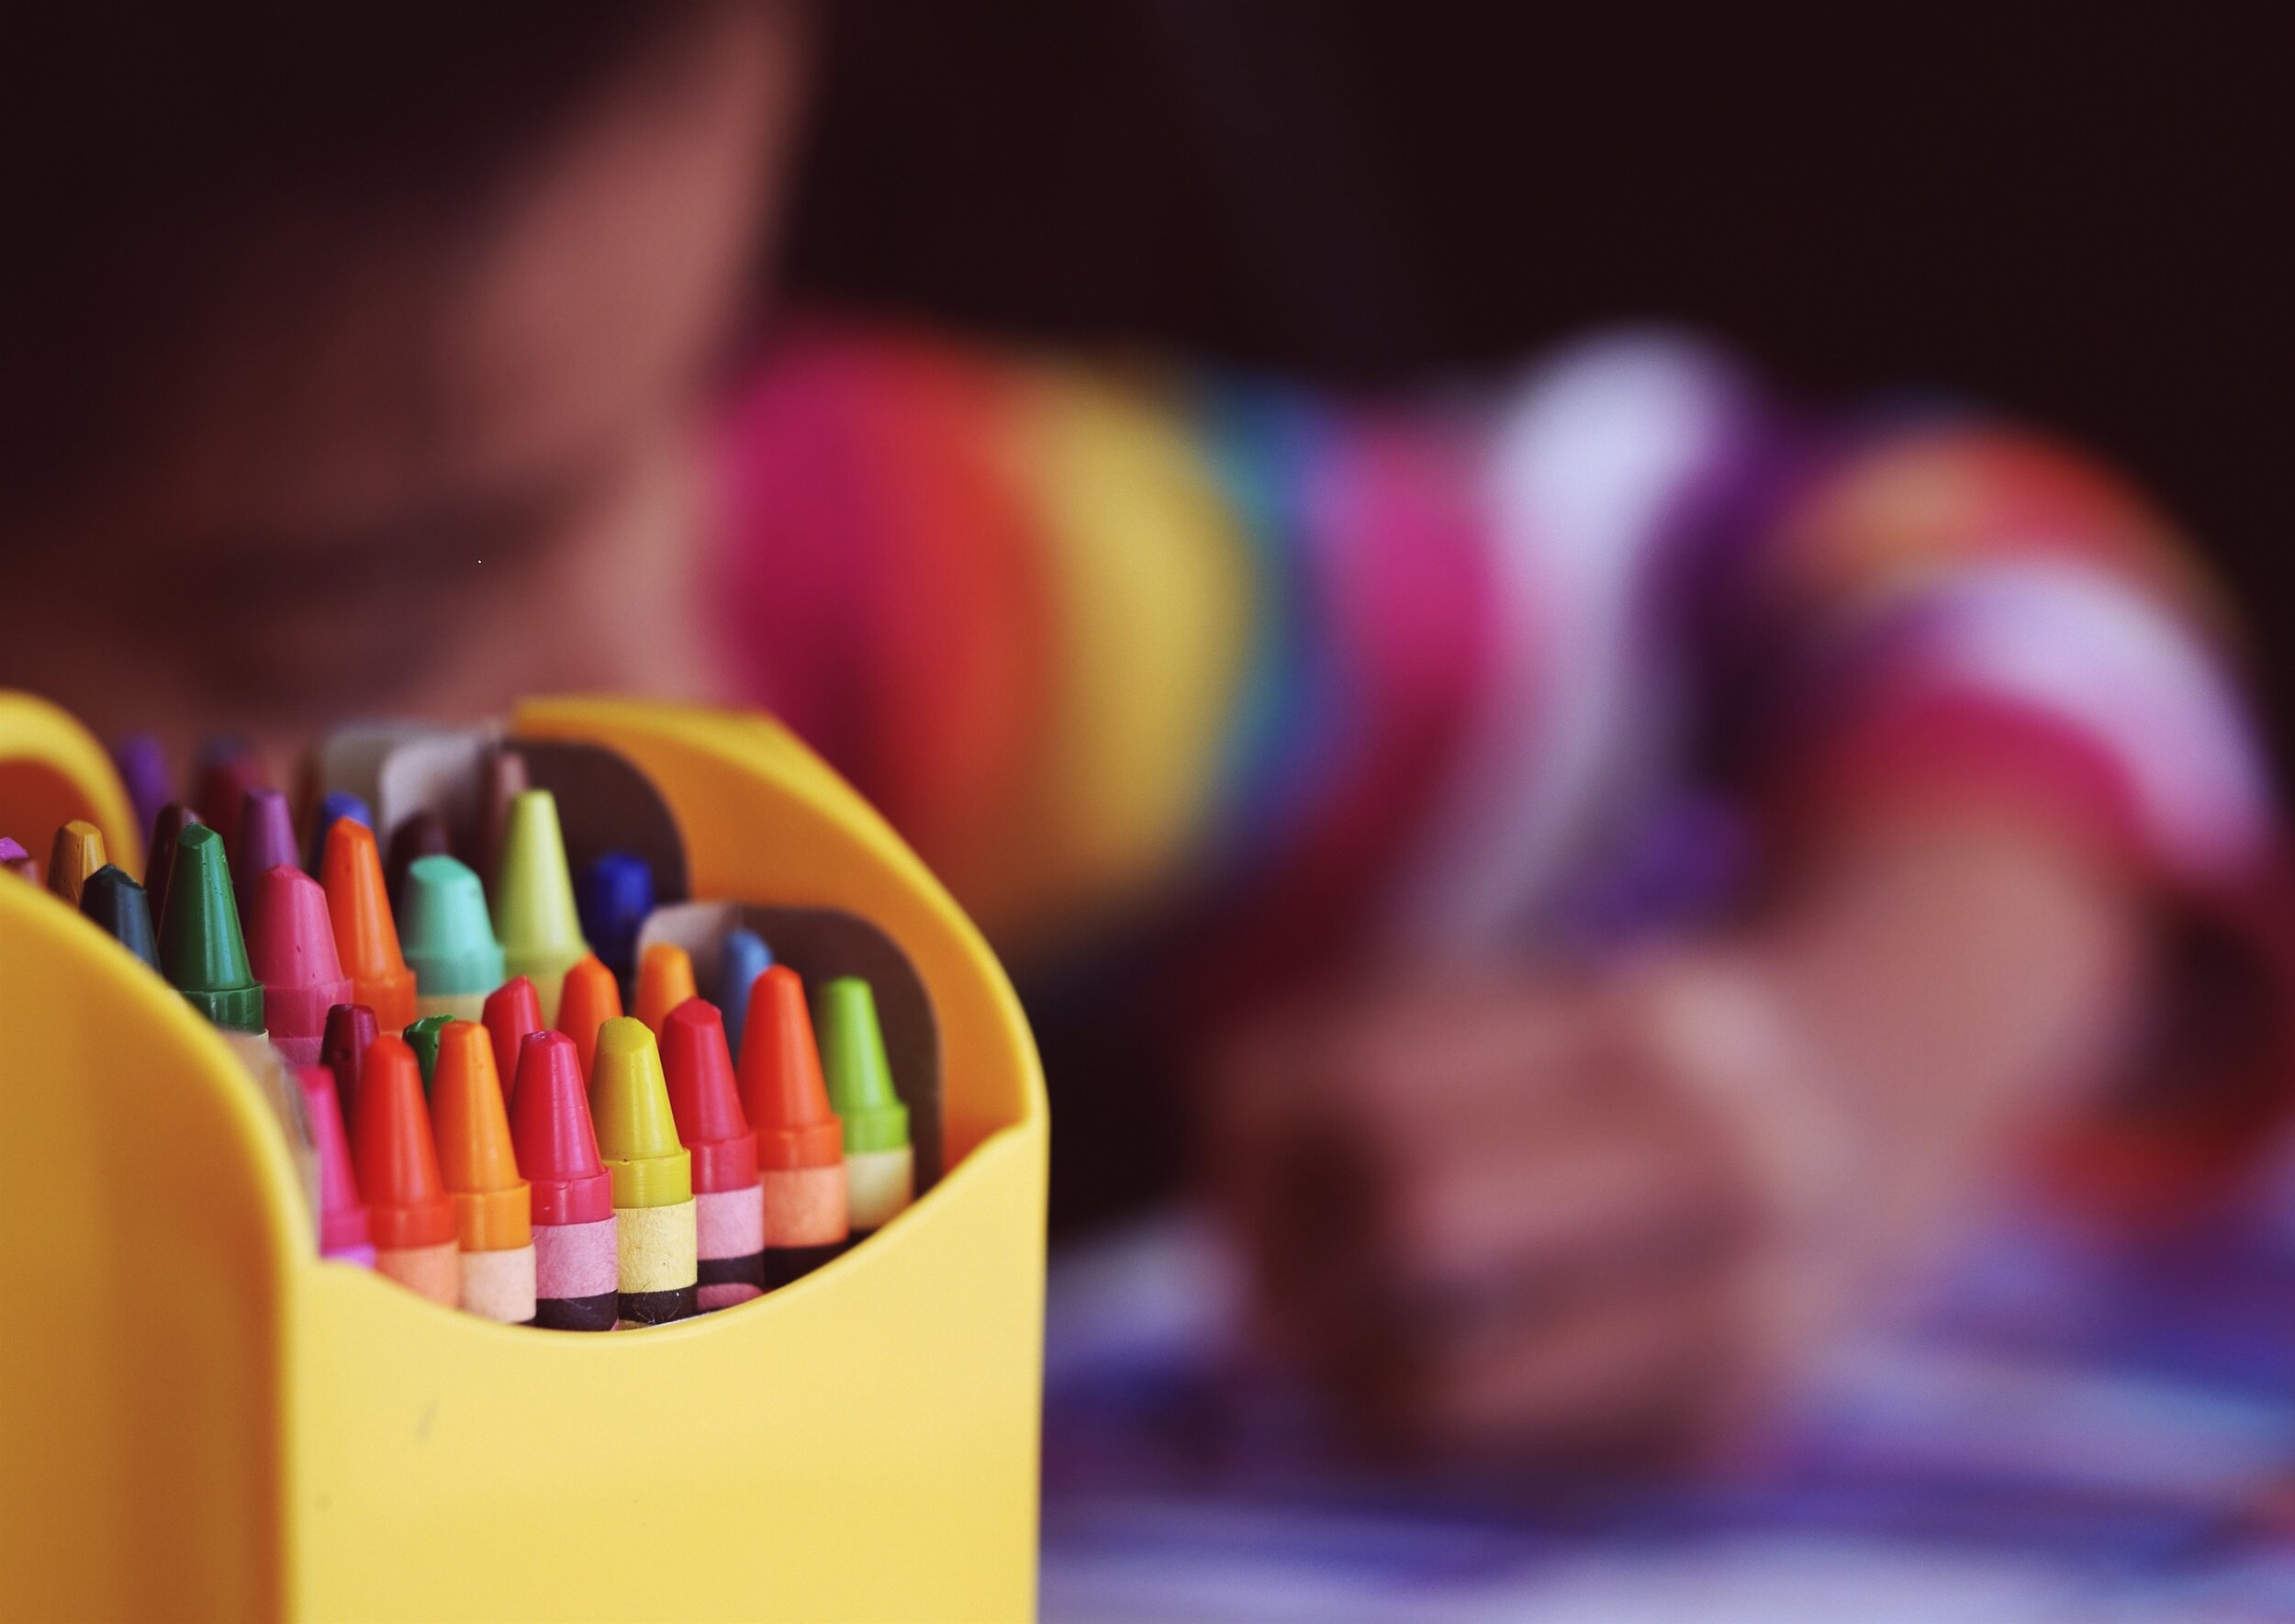 Closeup of a box of Crayons and blurred child colouring in the background